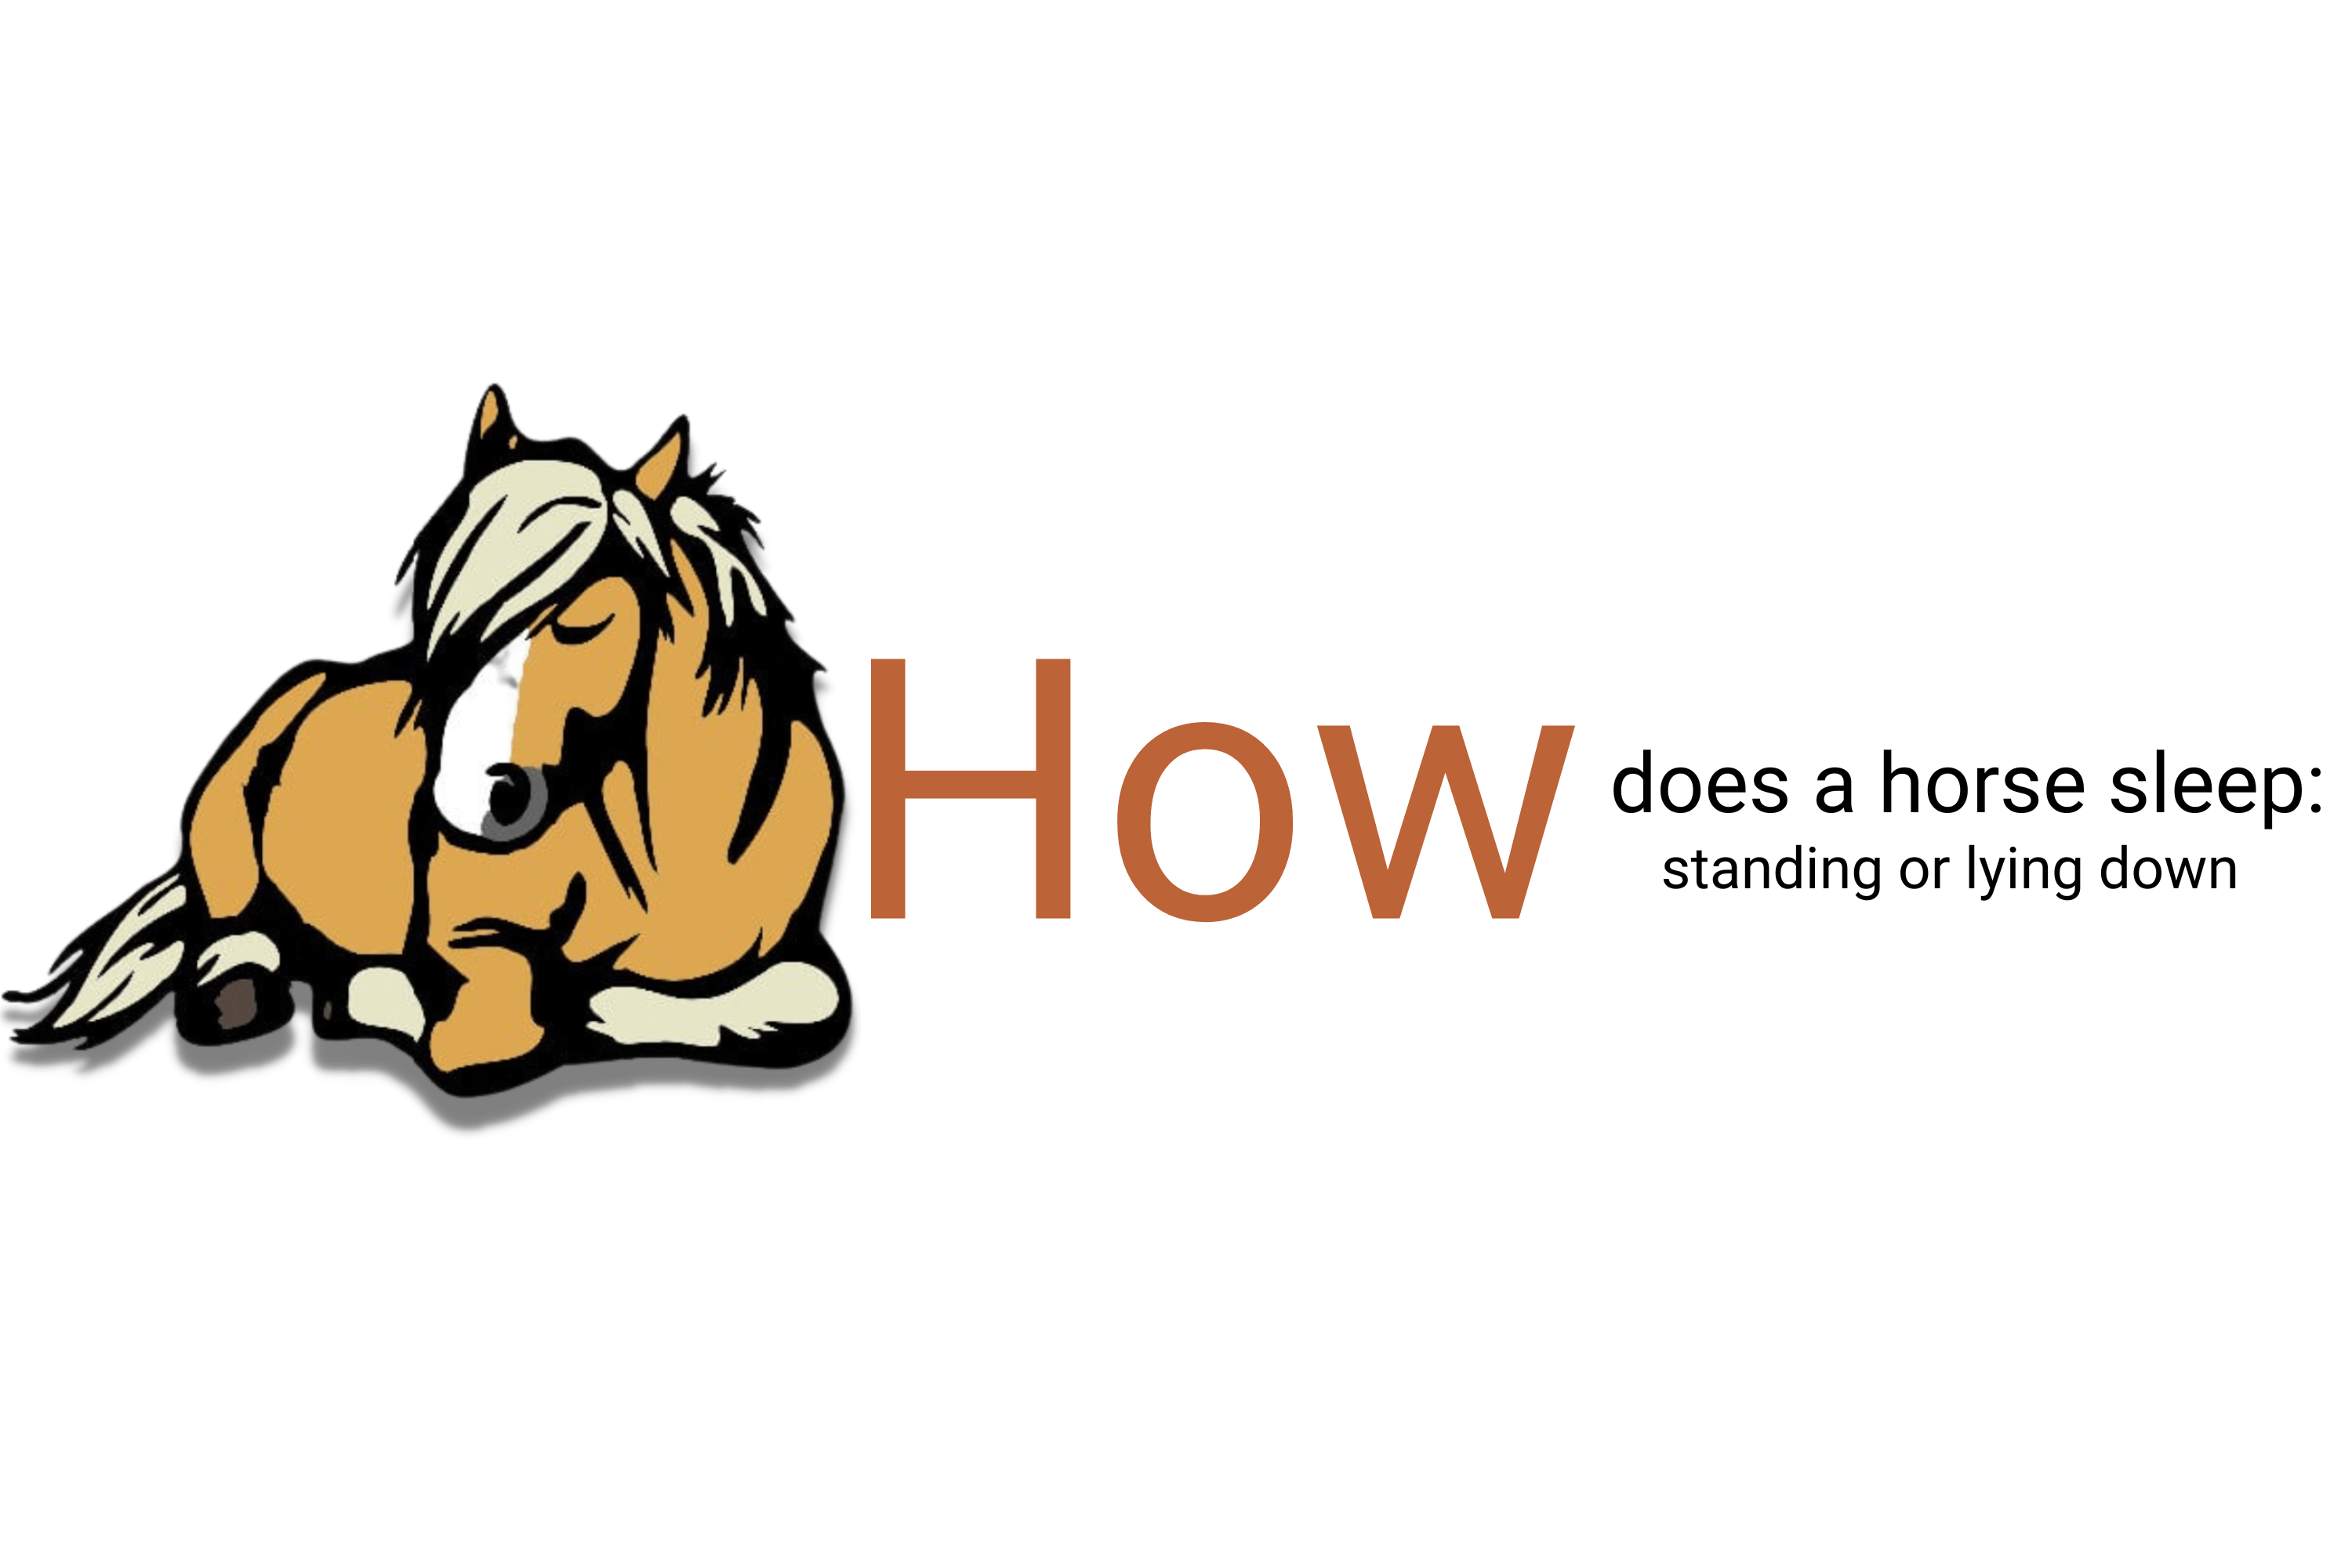 How does a horse sleep: standing or lying down?